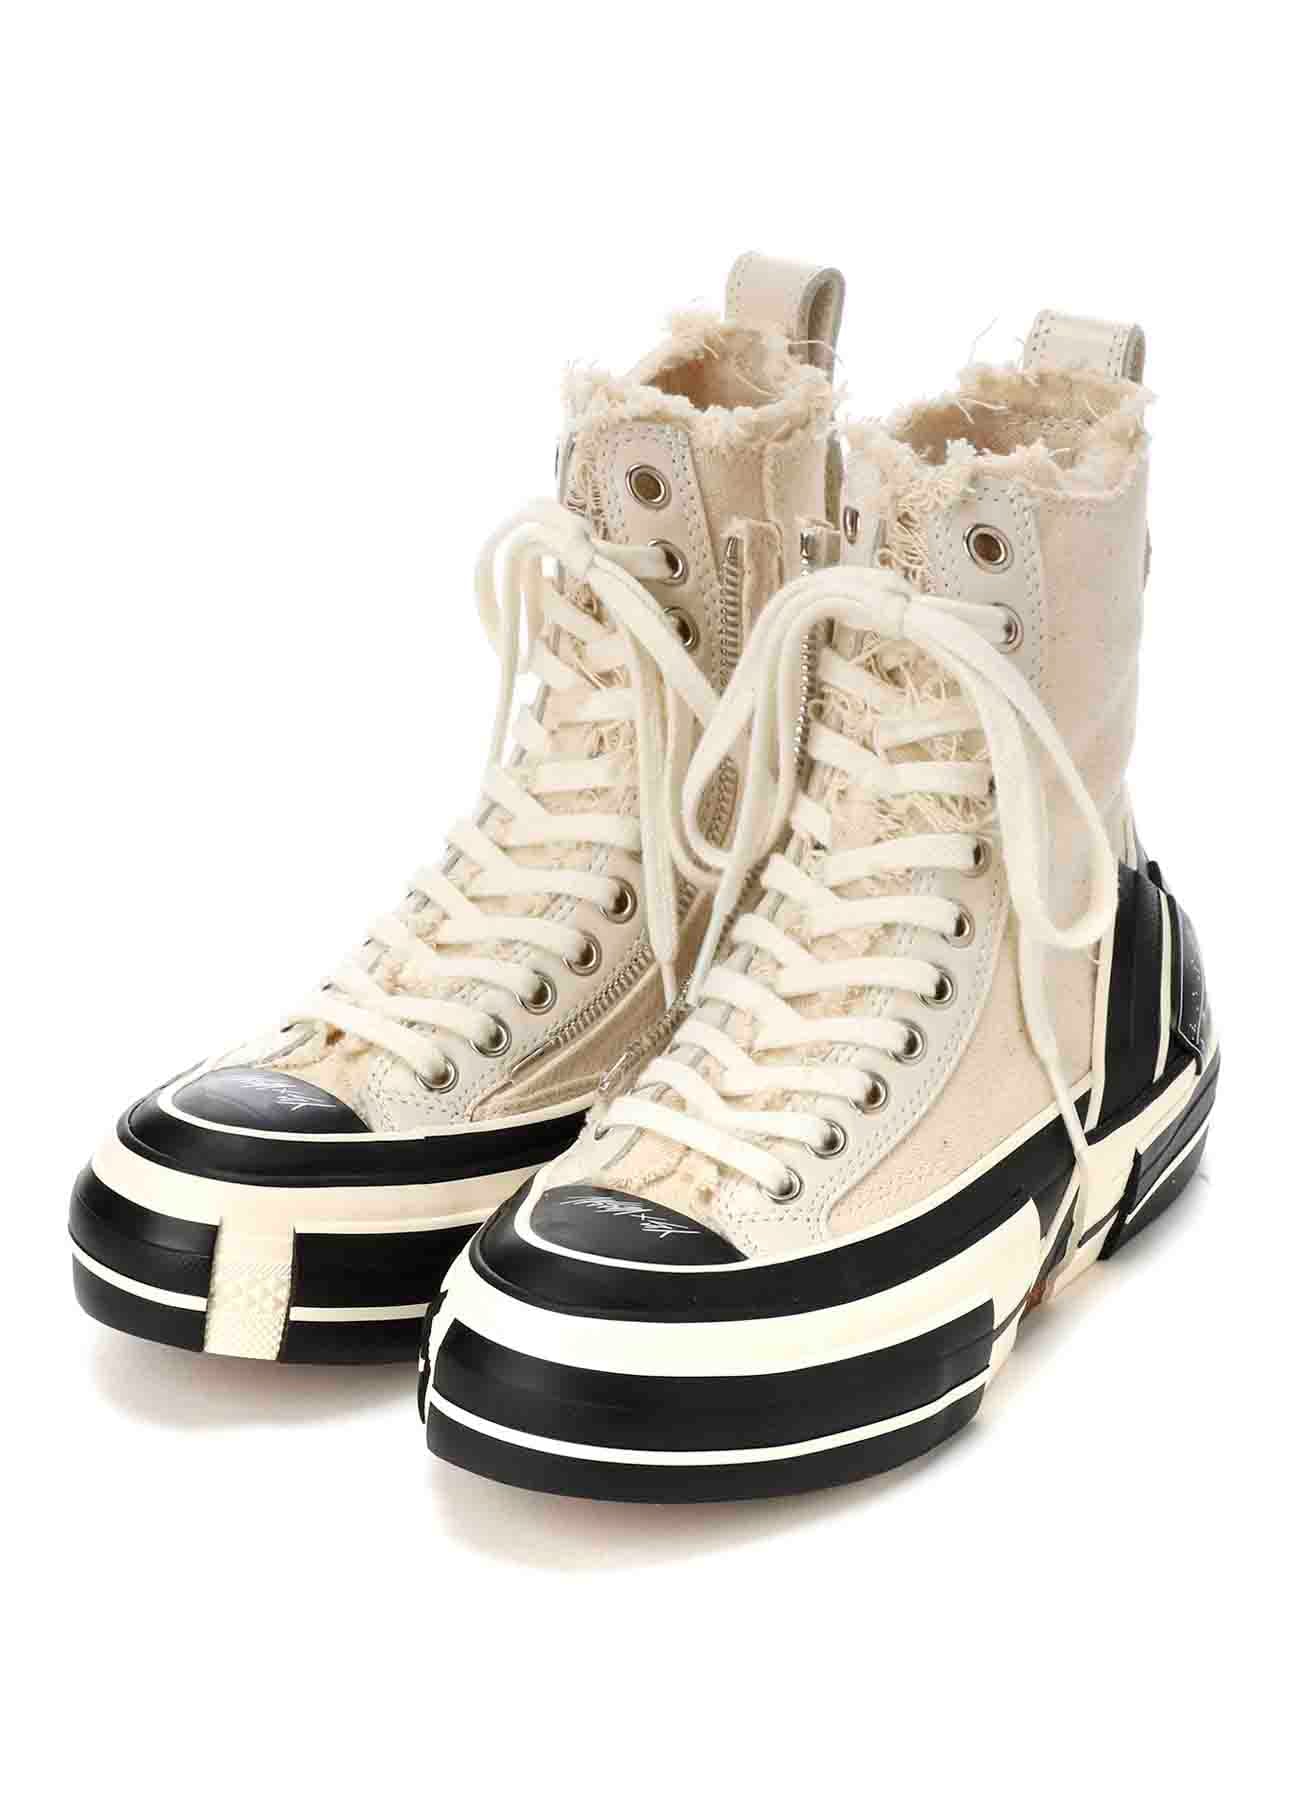 Y's × xVessel HIGH-CUT SNEAKERS(22.5cm WHITE): Vintage｜THE SHOP